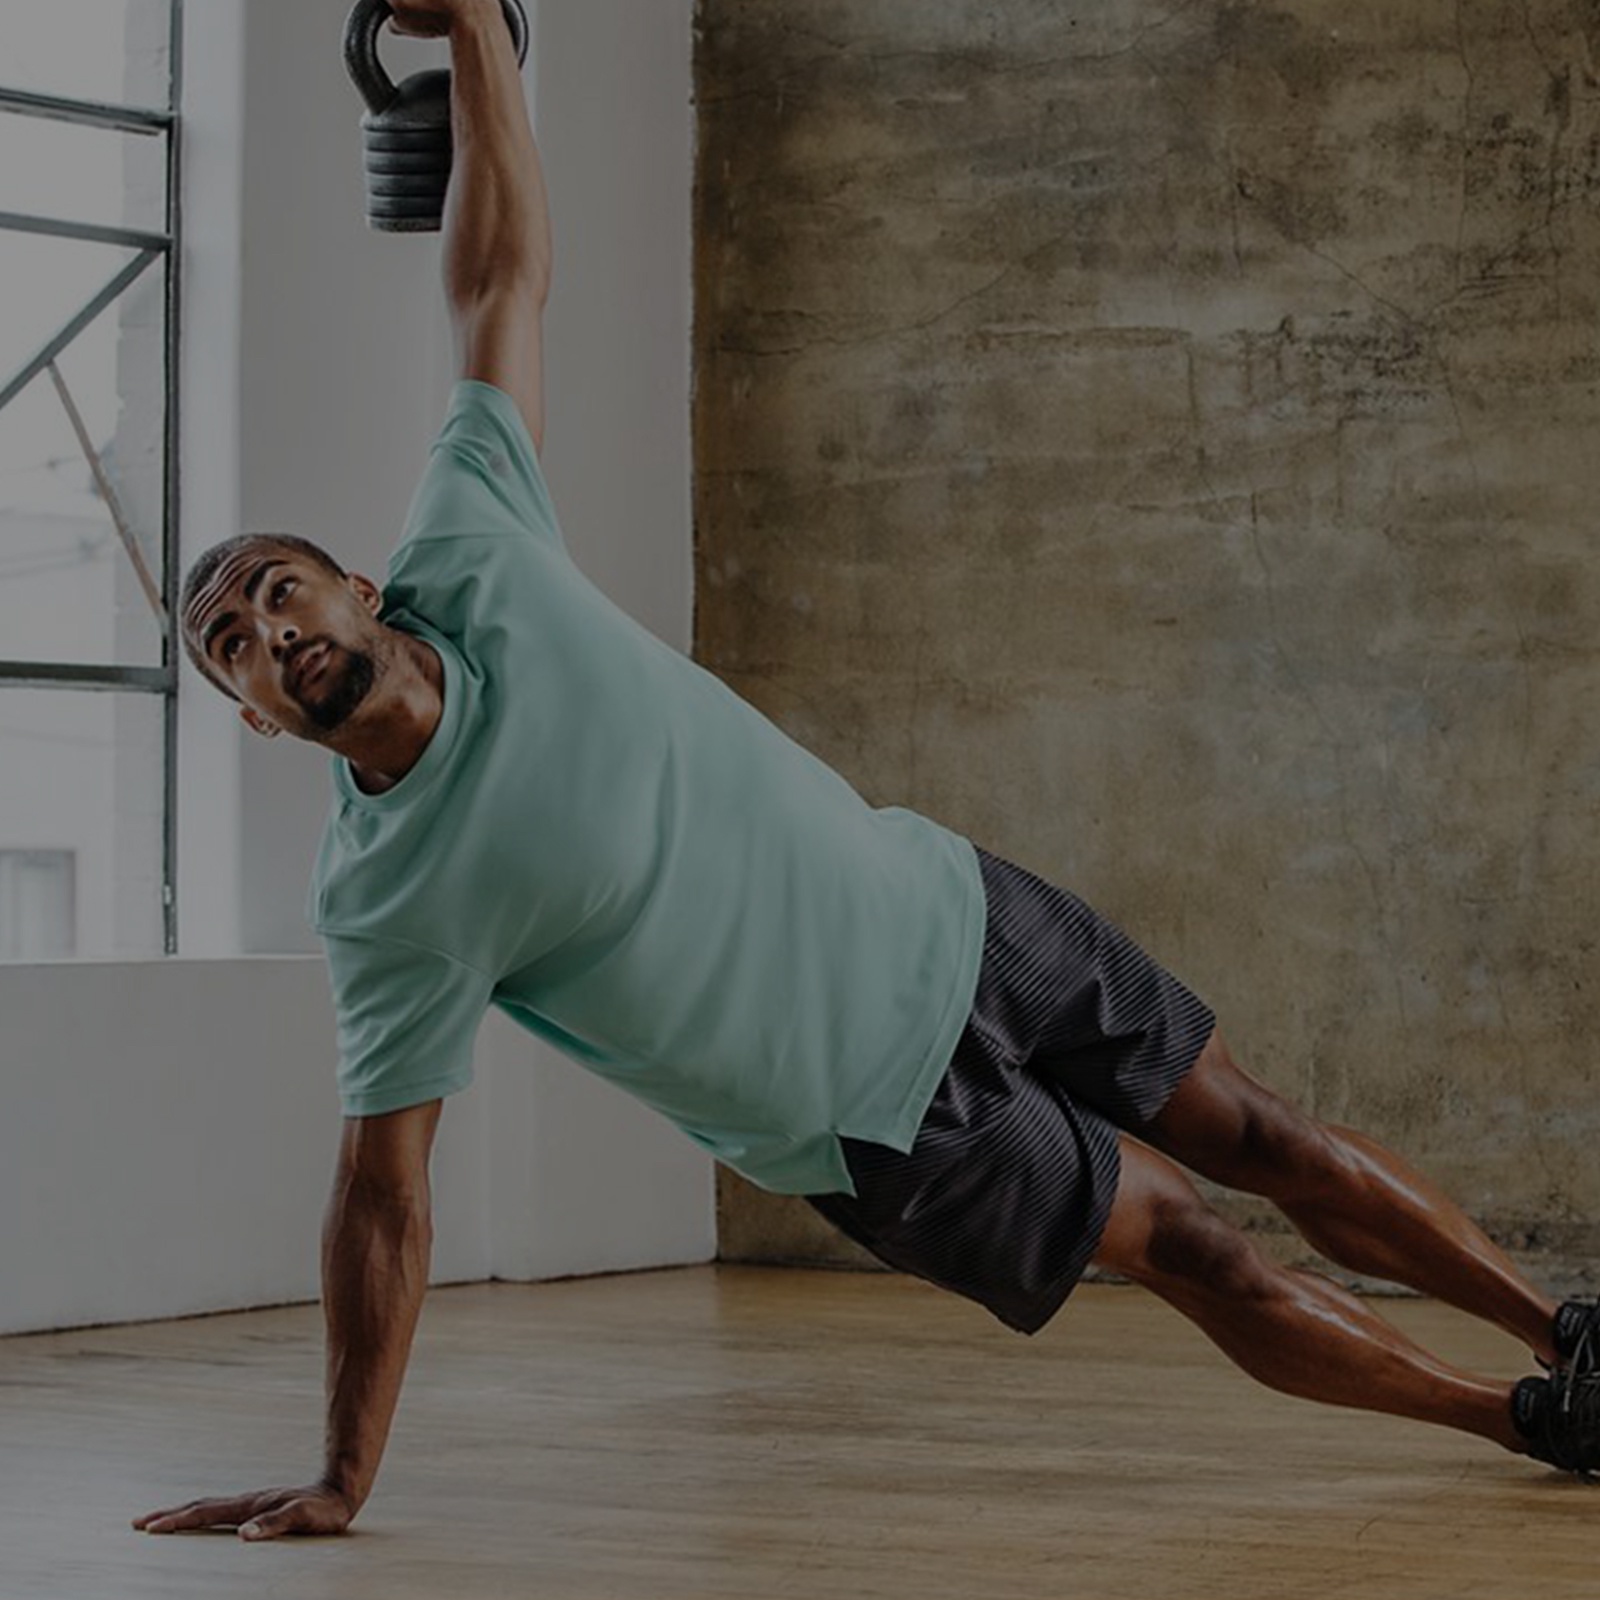 Man in a turquoise shirt and gray shorts doing a side plank.